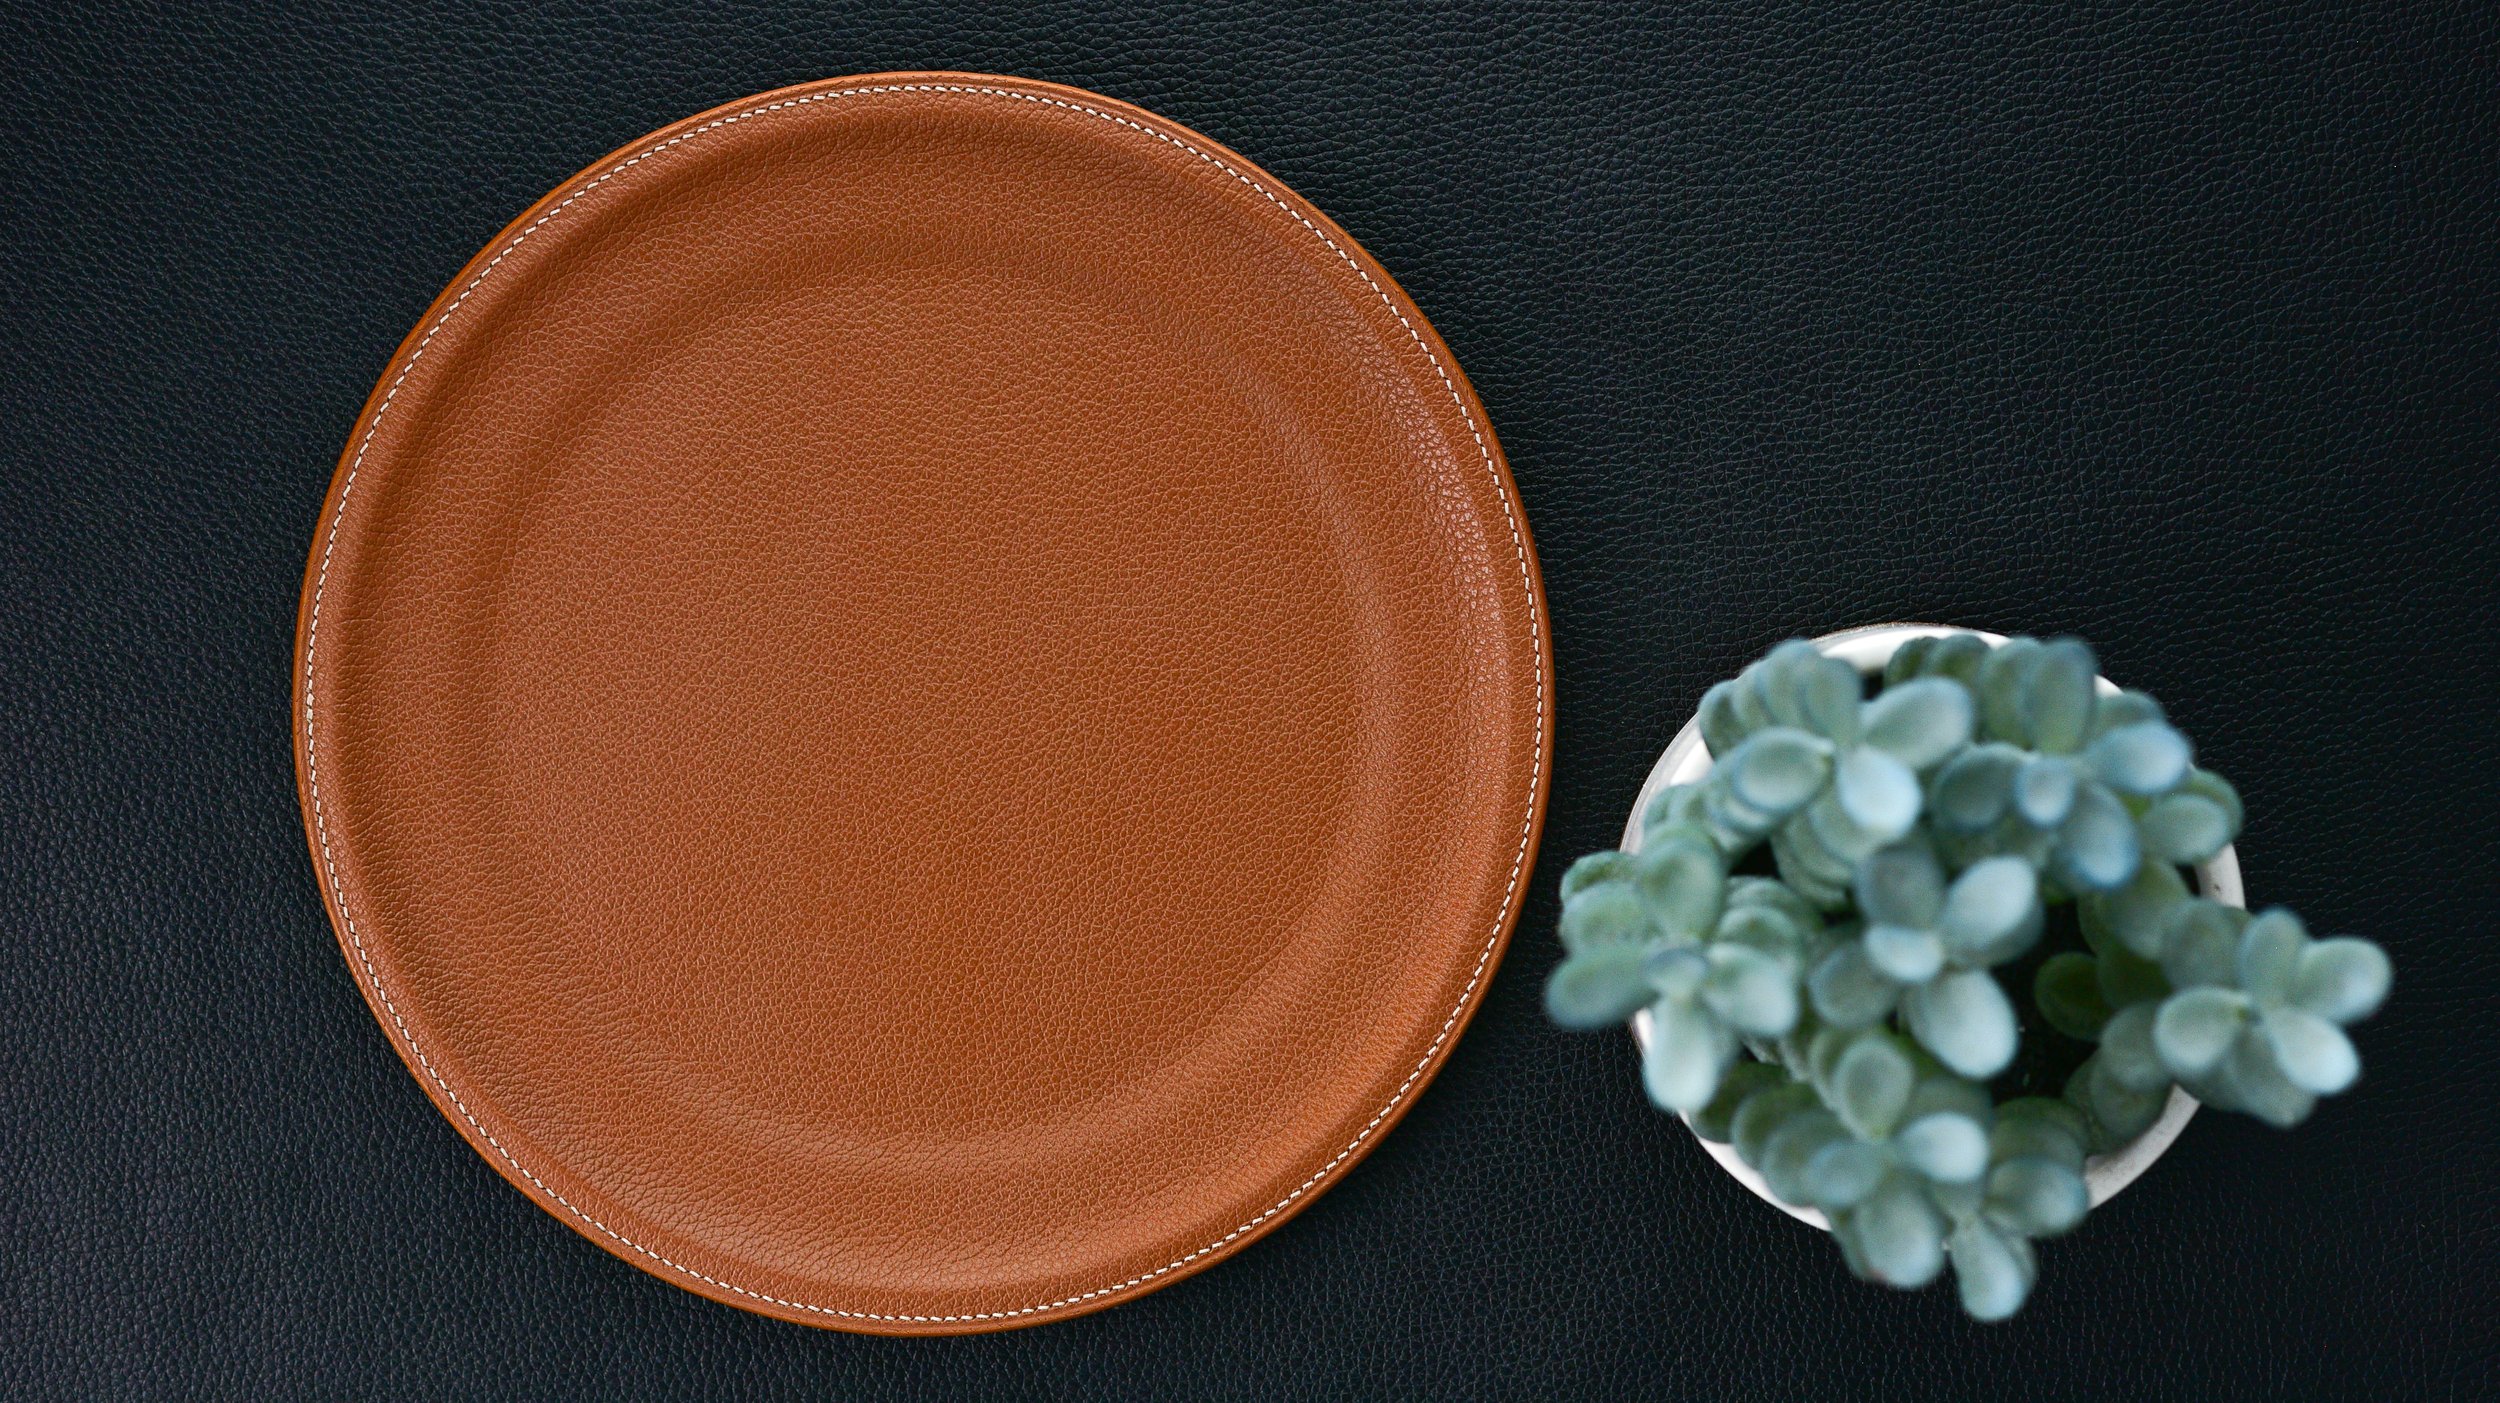 custom_leather_plate_leather_serving_tray_serving_plate_cocktail_tray_camel.jpg